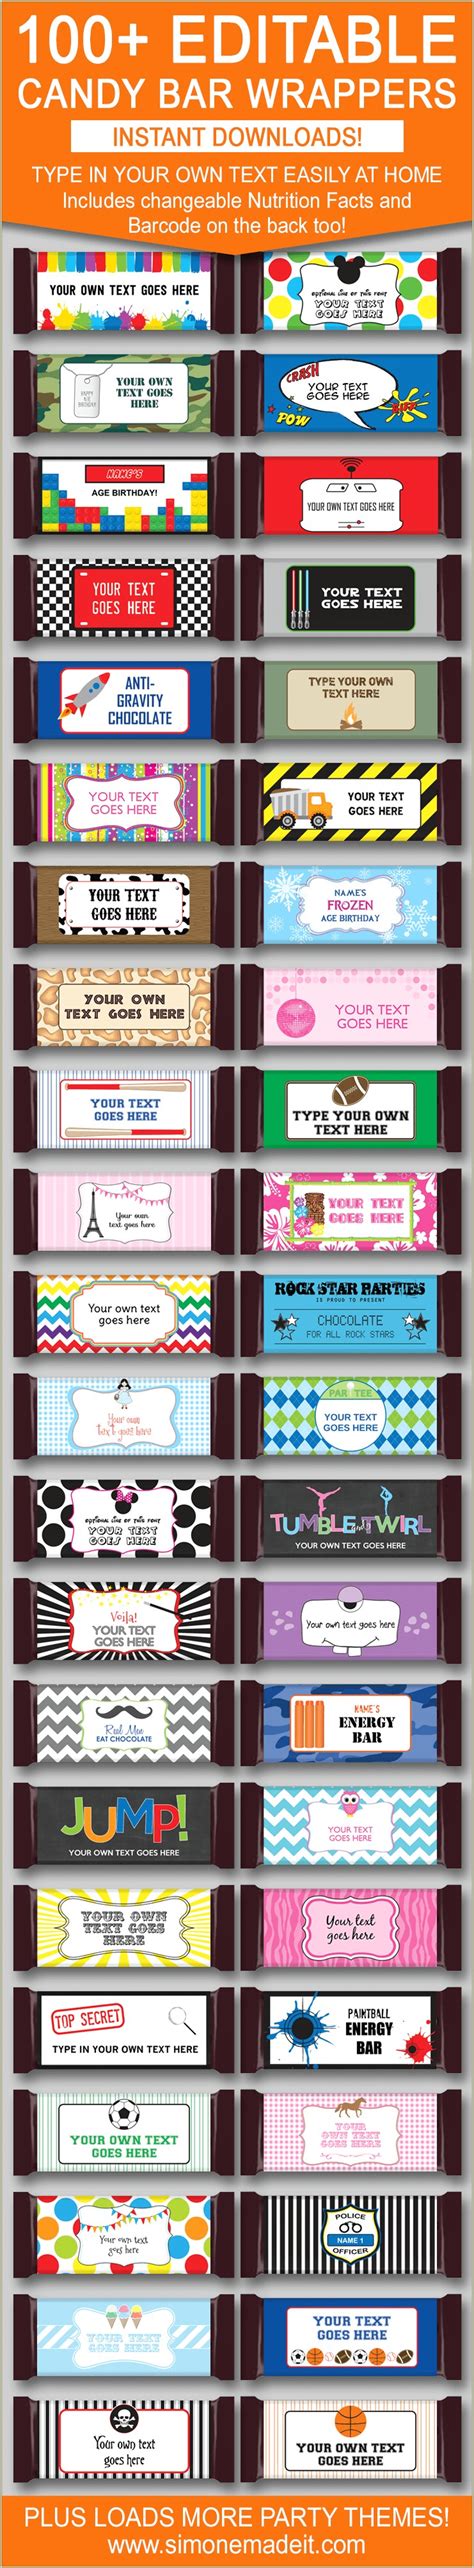 printable candy bar wrappers templates graduation resume gallery